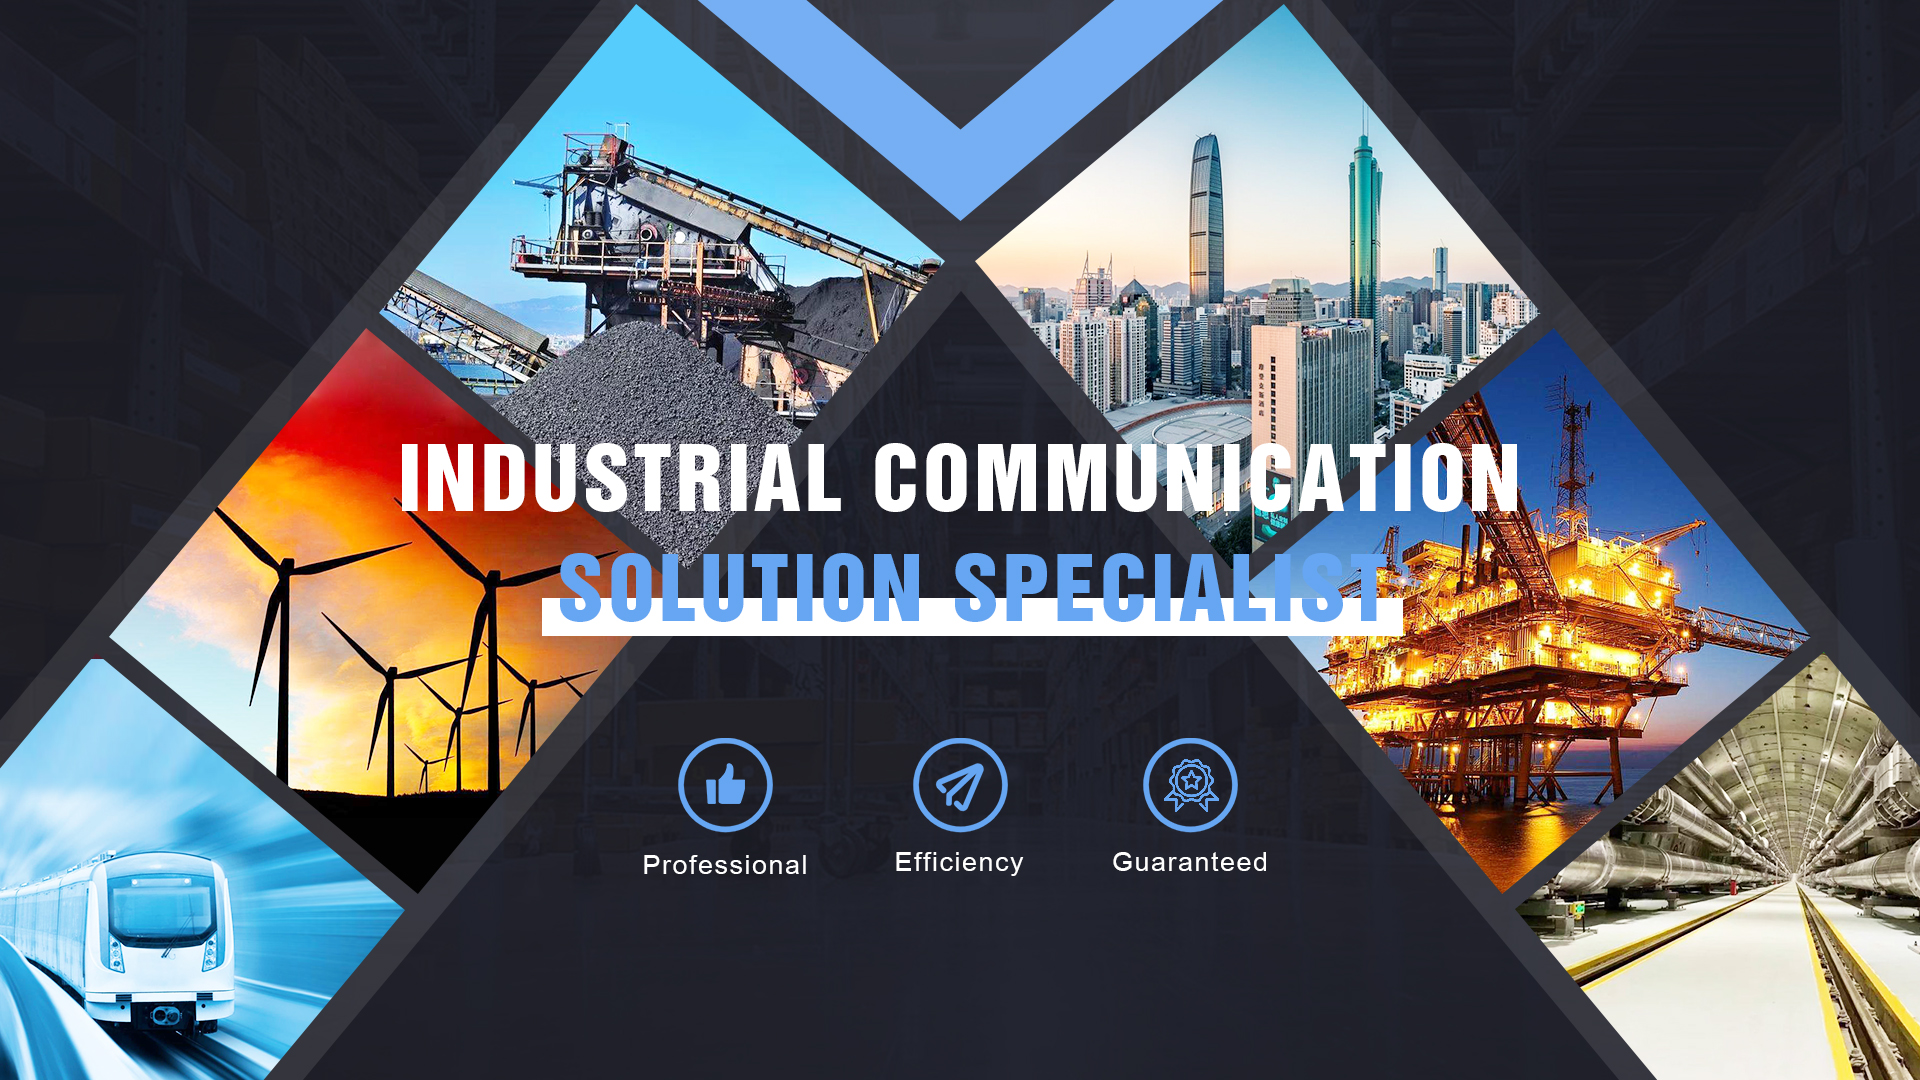 Industrial communication solution specialist